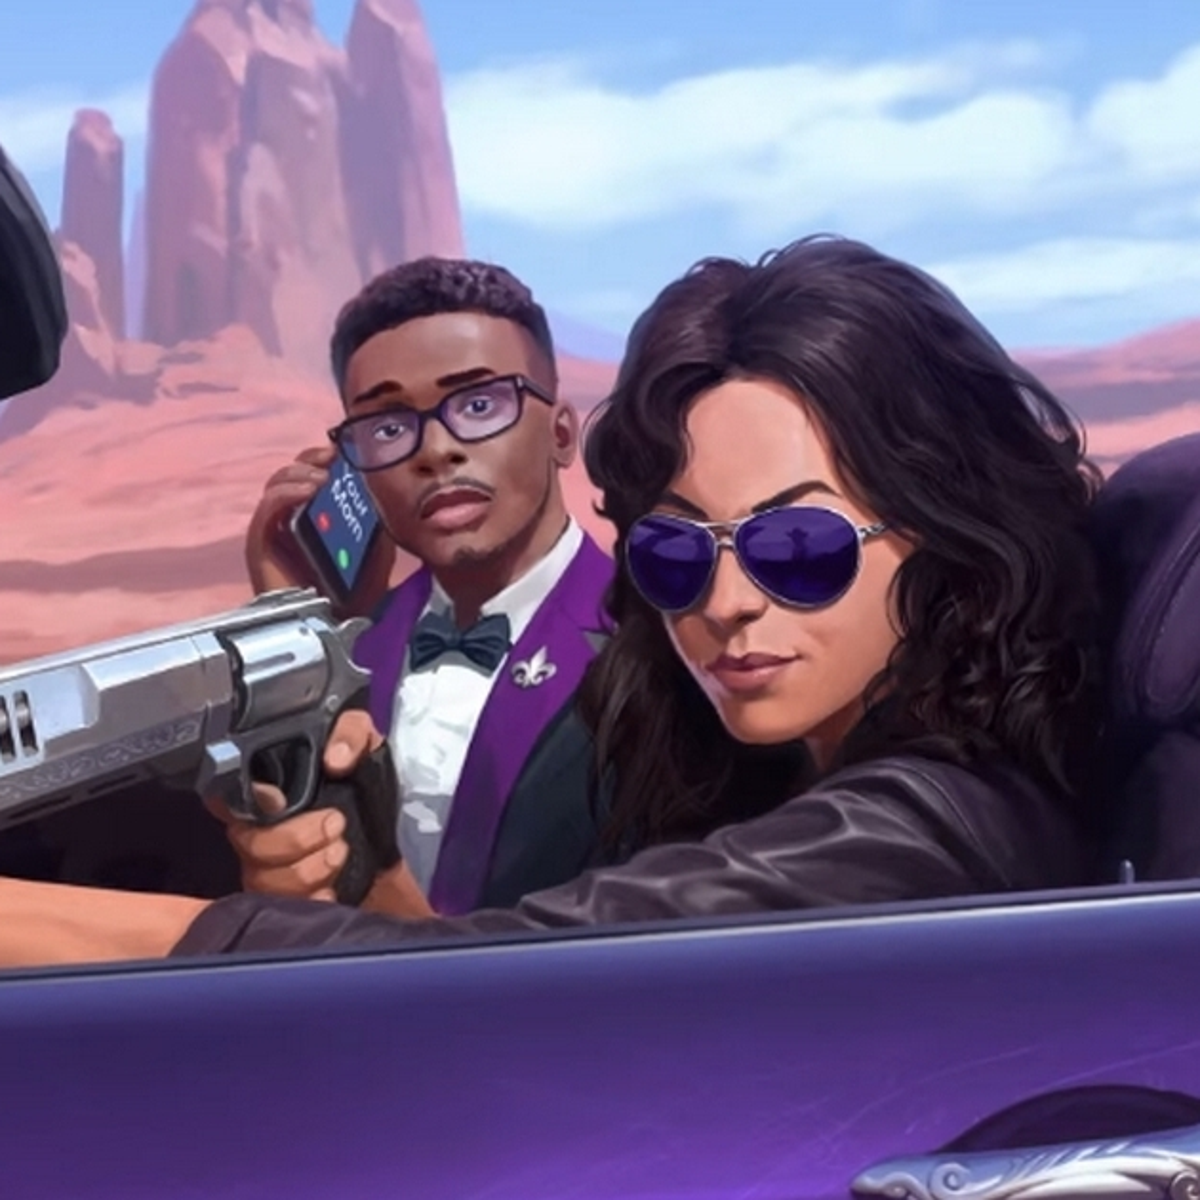 Here's a look at the new Saints Row's opening story missions